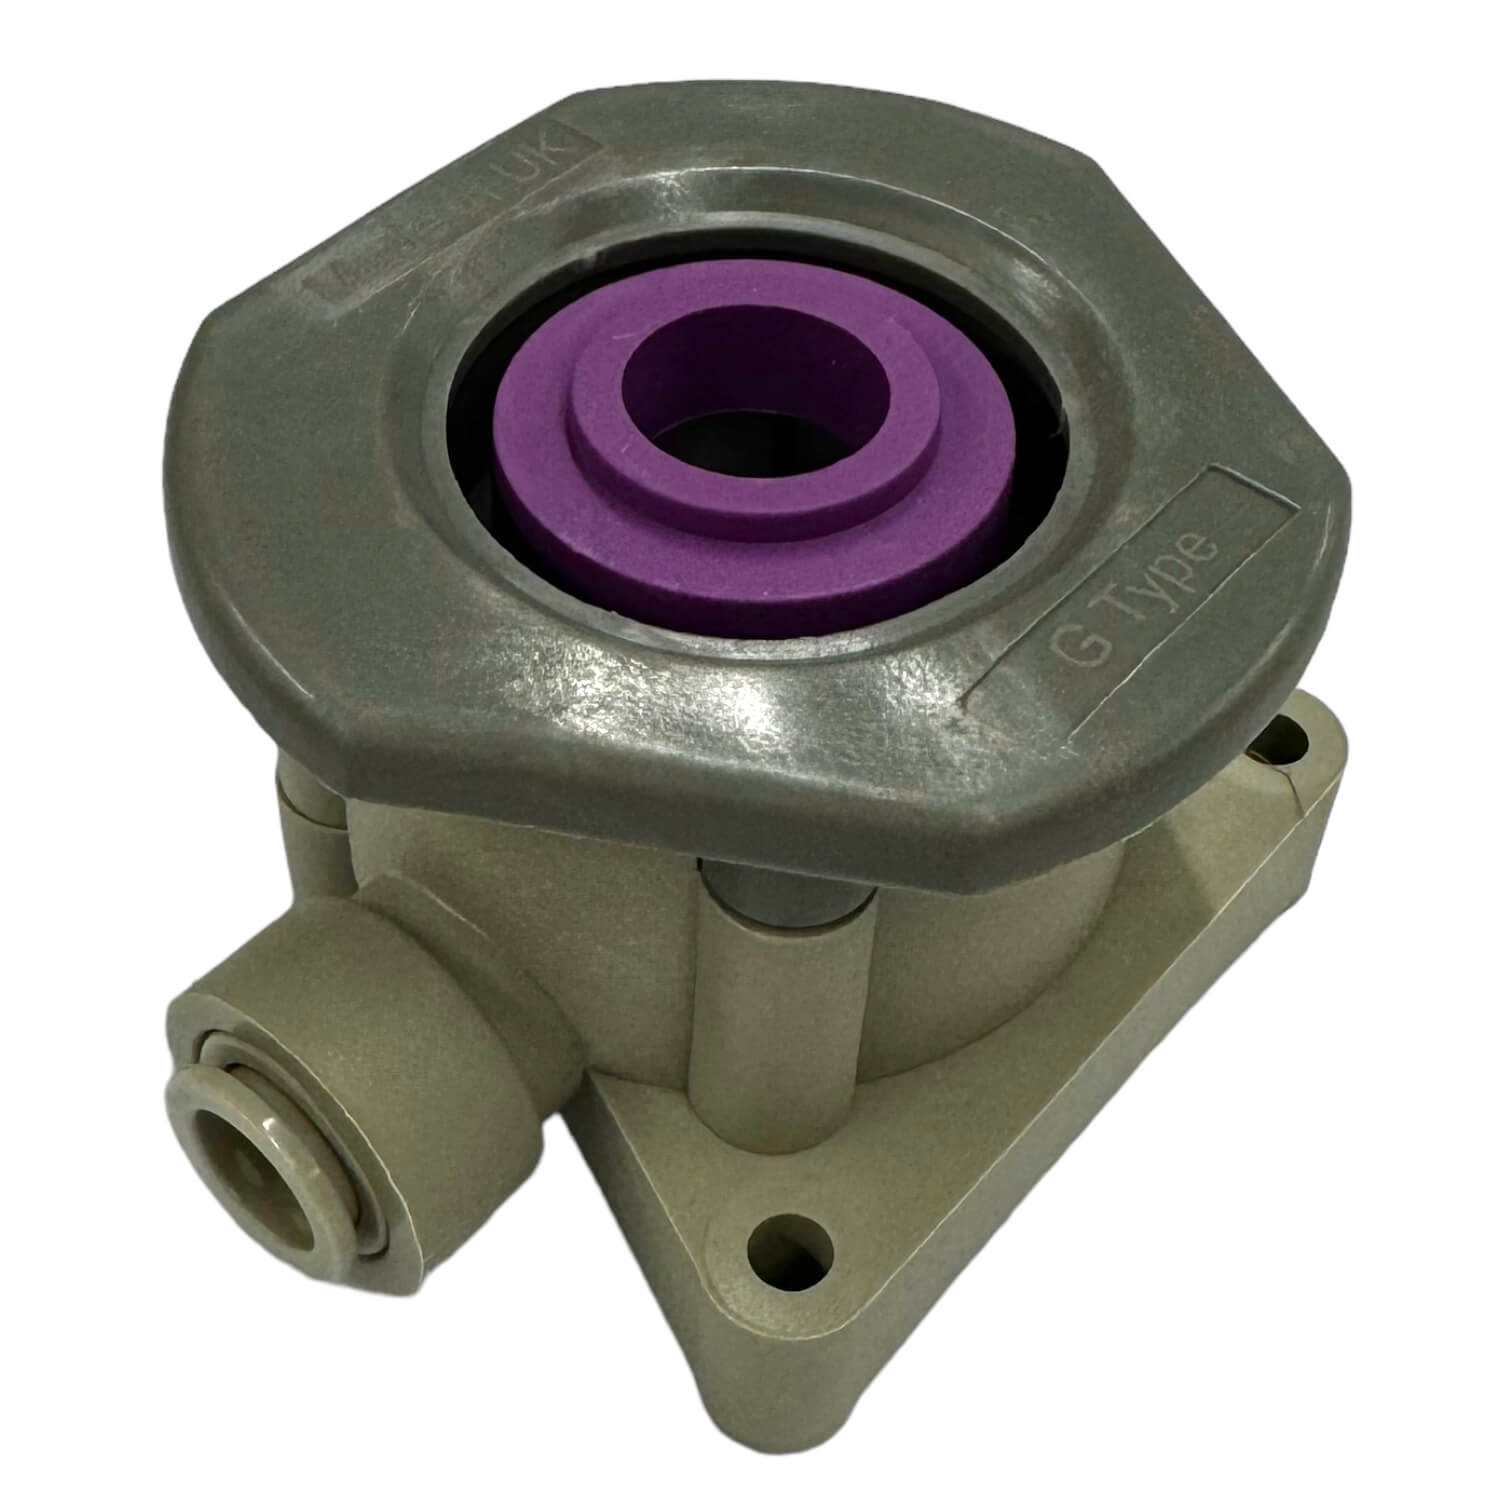 Grundy | G type cleaning socket